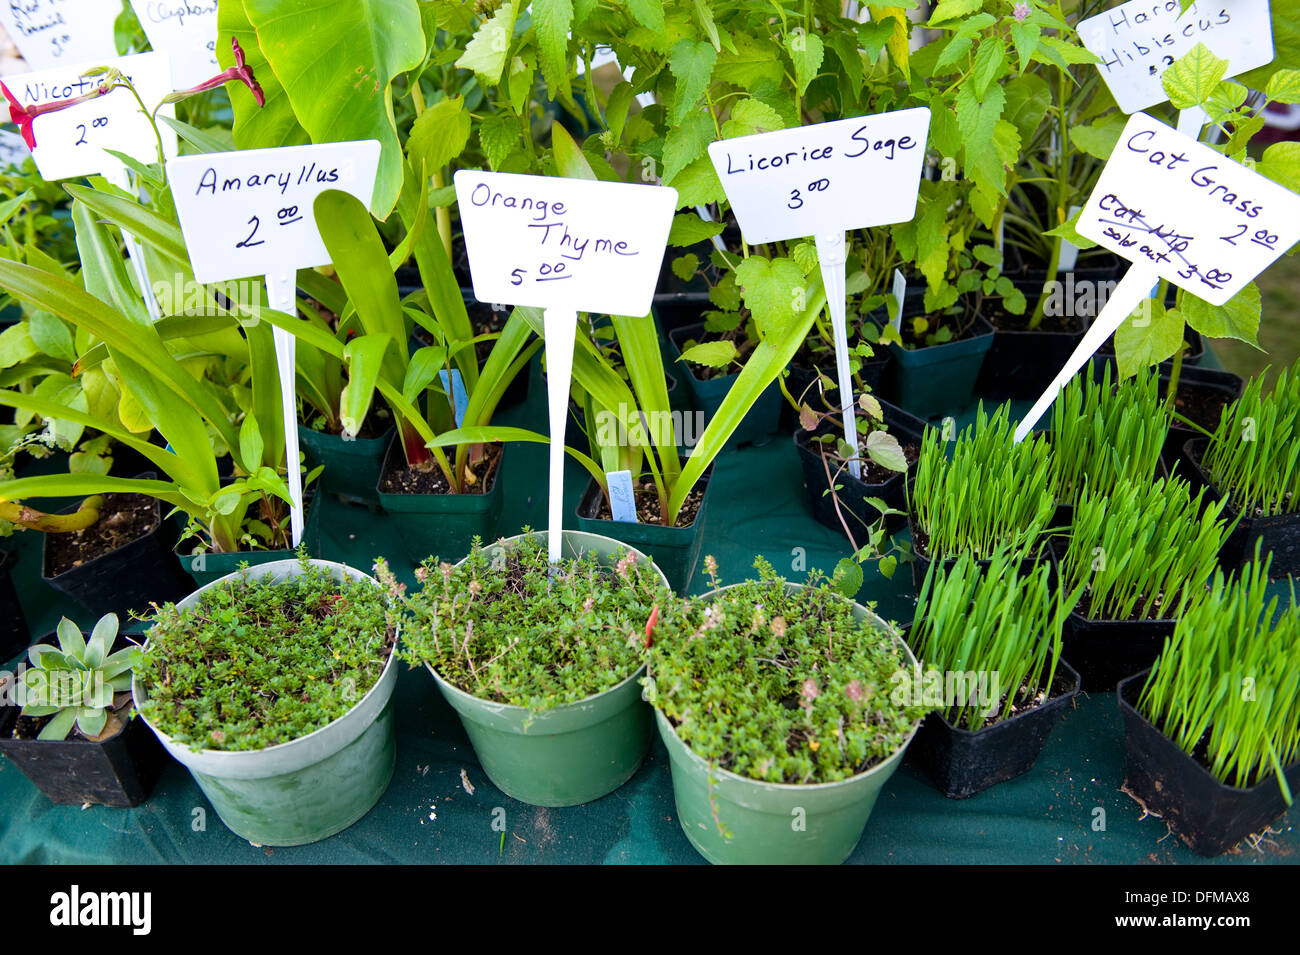 Potted herbs for sale in small quantities Stock Photo